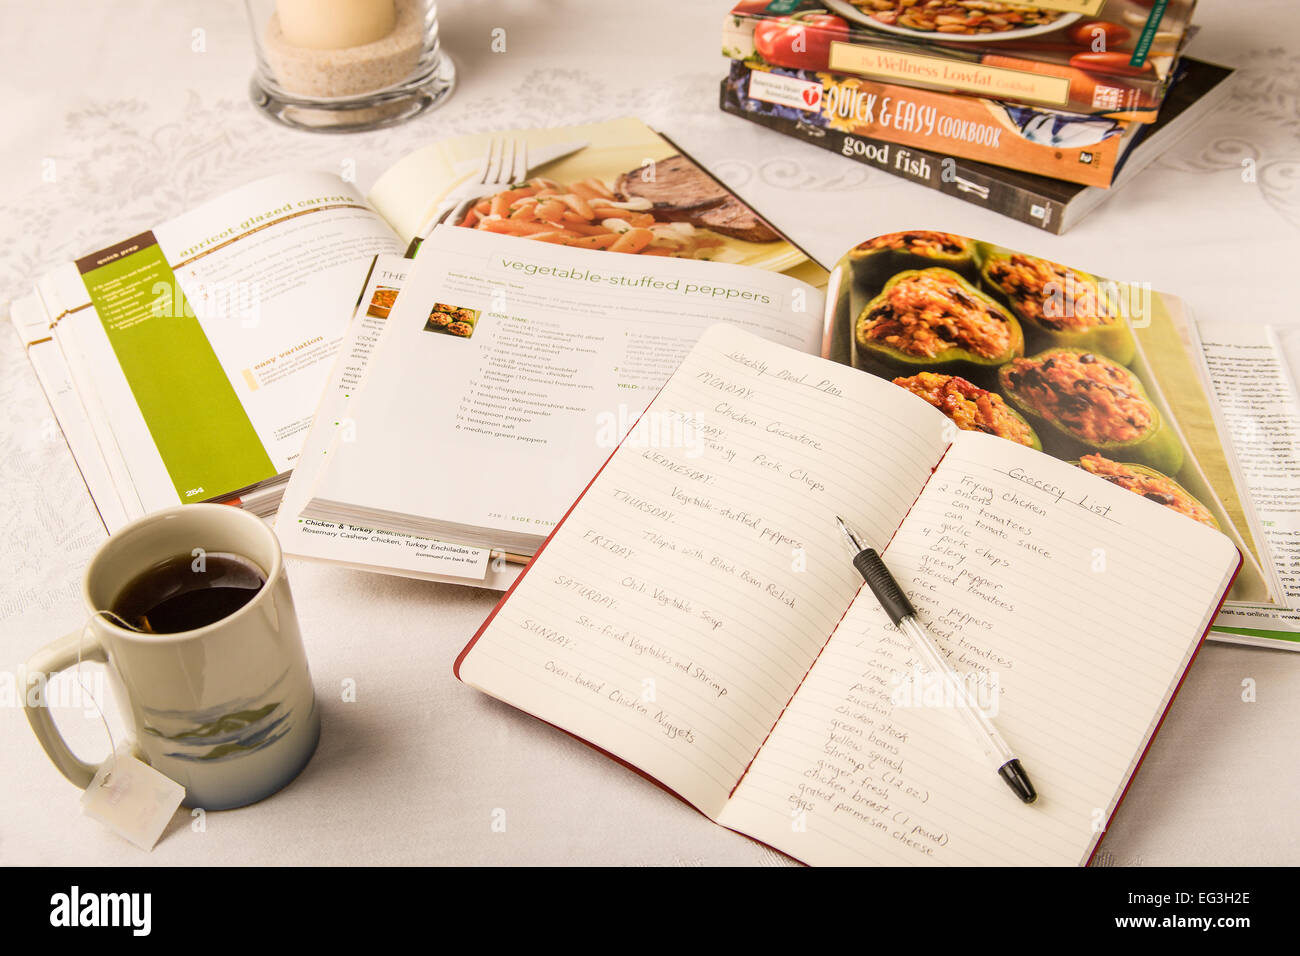 Meal planning at the dining room table, with healthy cookbooks spread open.  A notepad shows dinner meals and groceries by day. Stock Photo